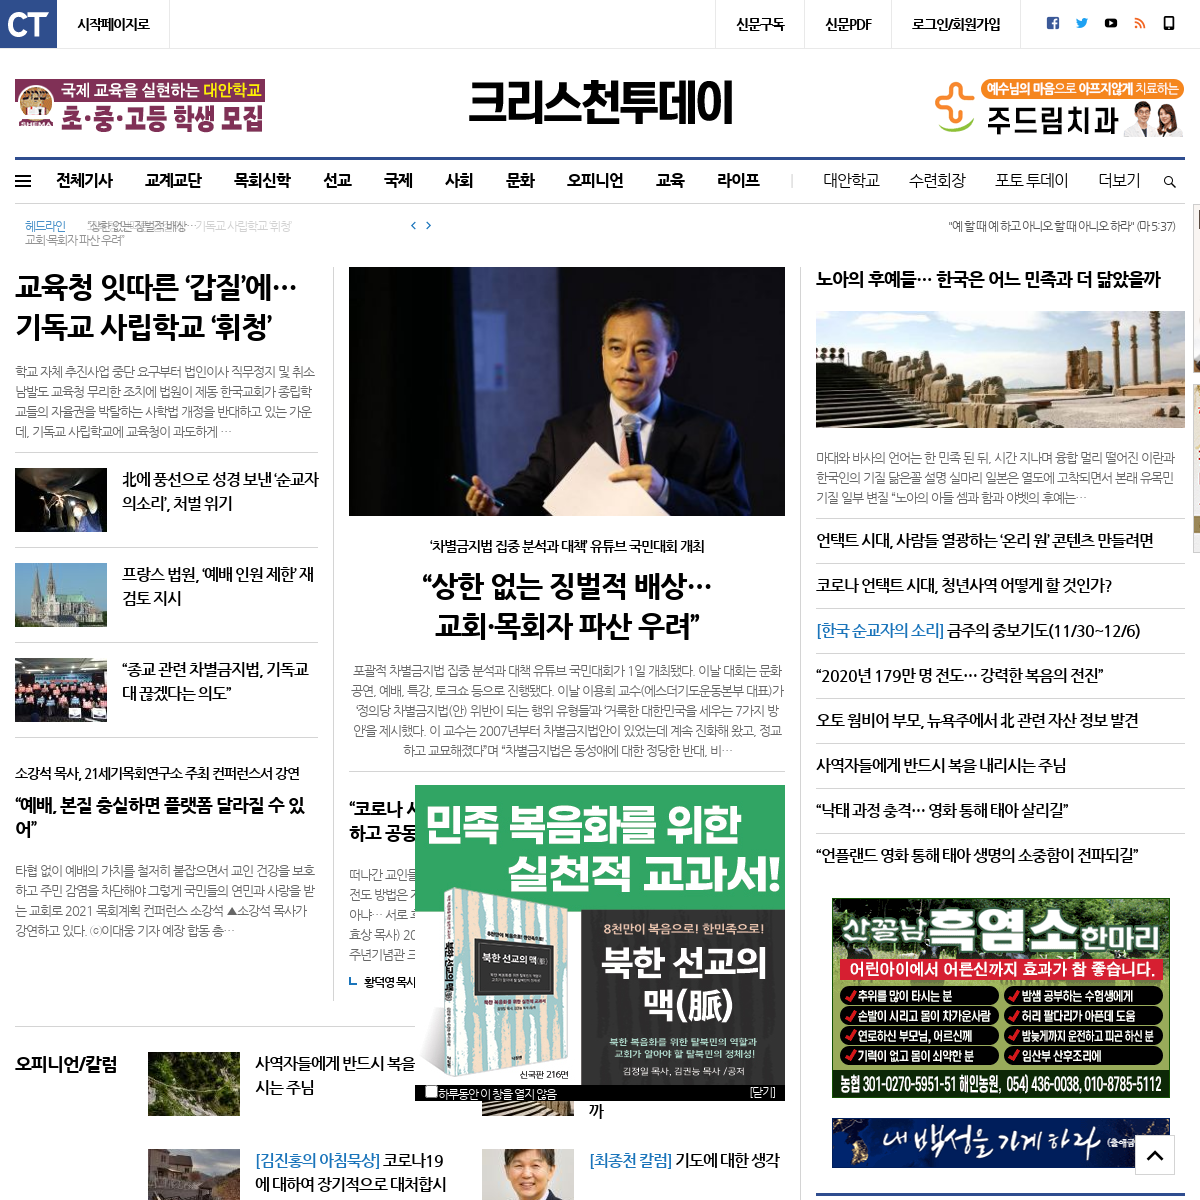 A complete backup of christiantoday.co.kr